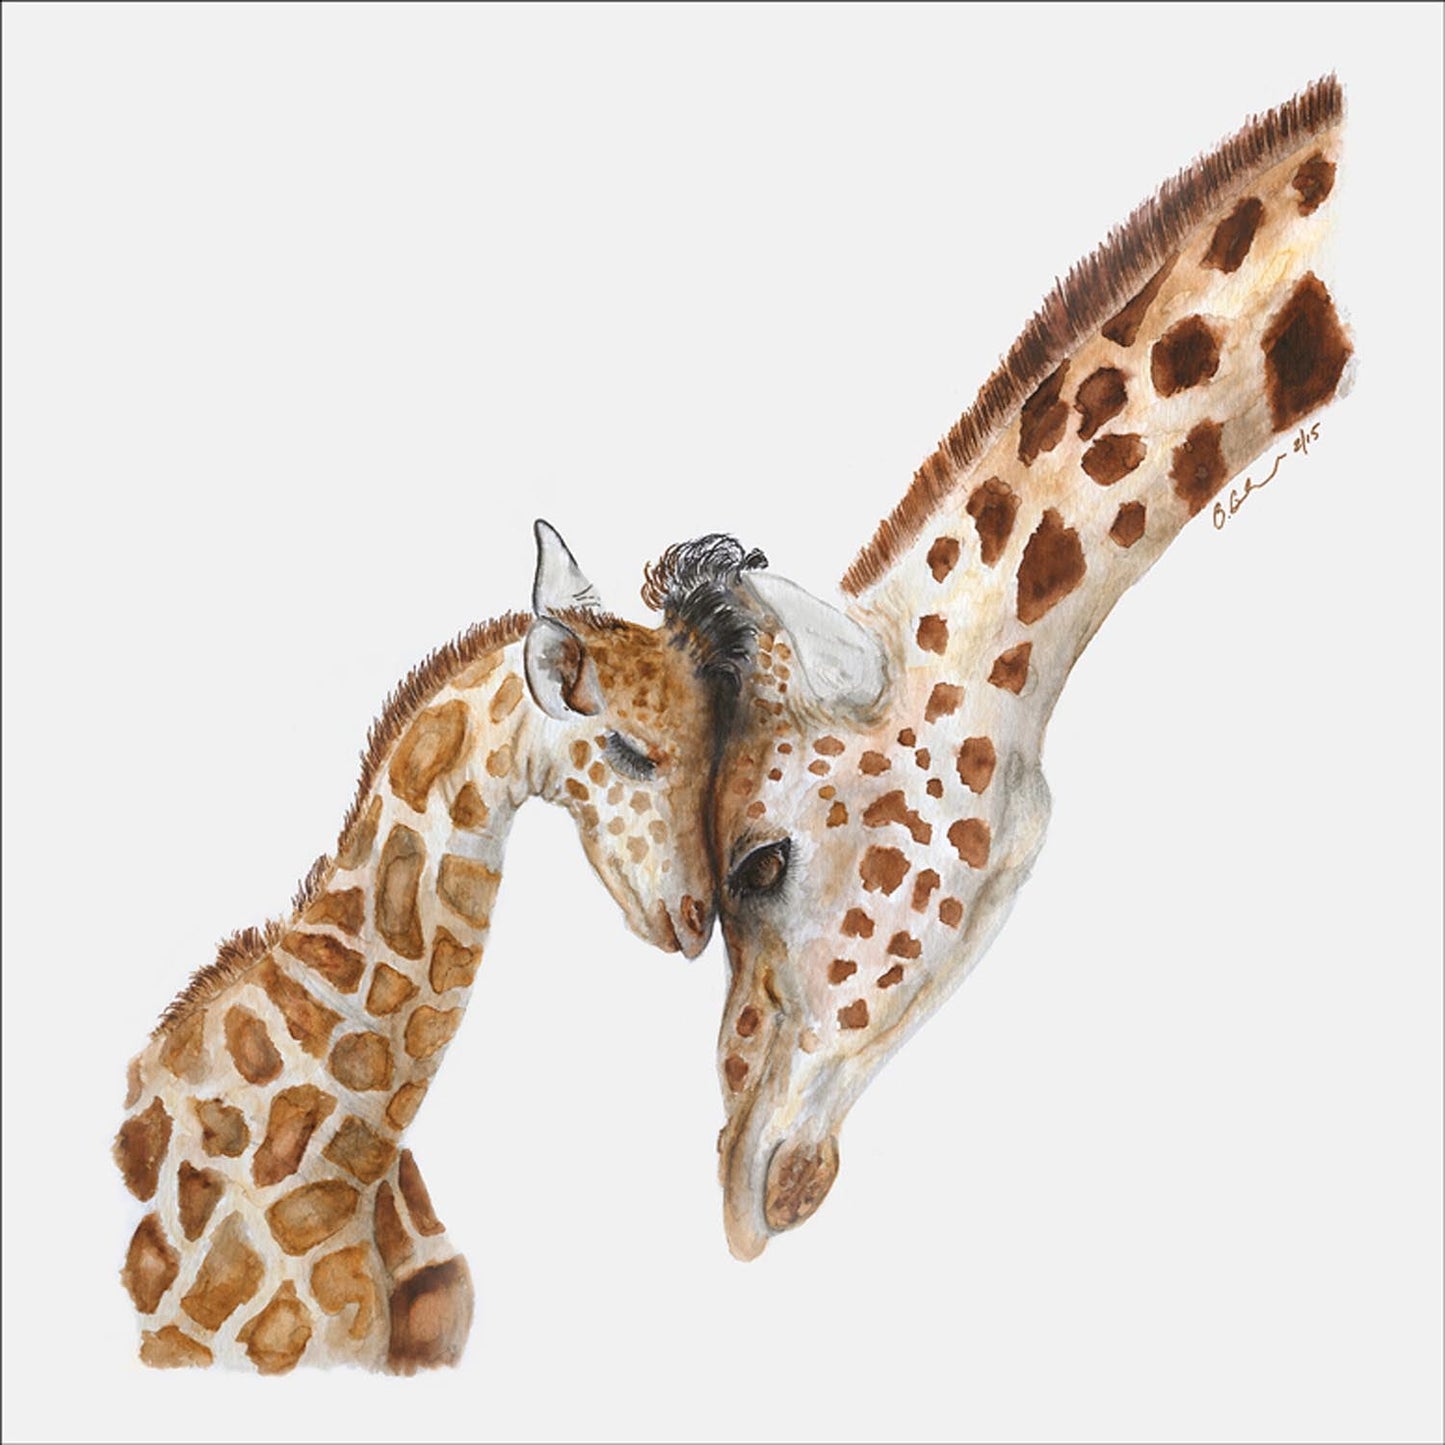 Mom and Baby Giraffes Canvas Wall Art